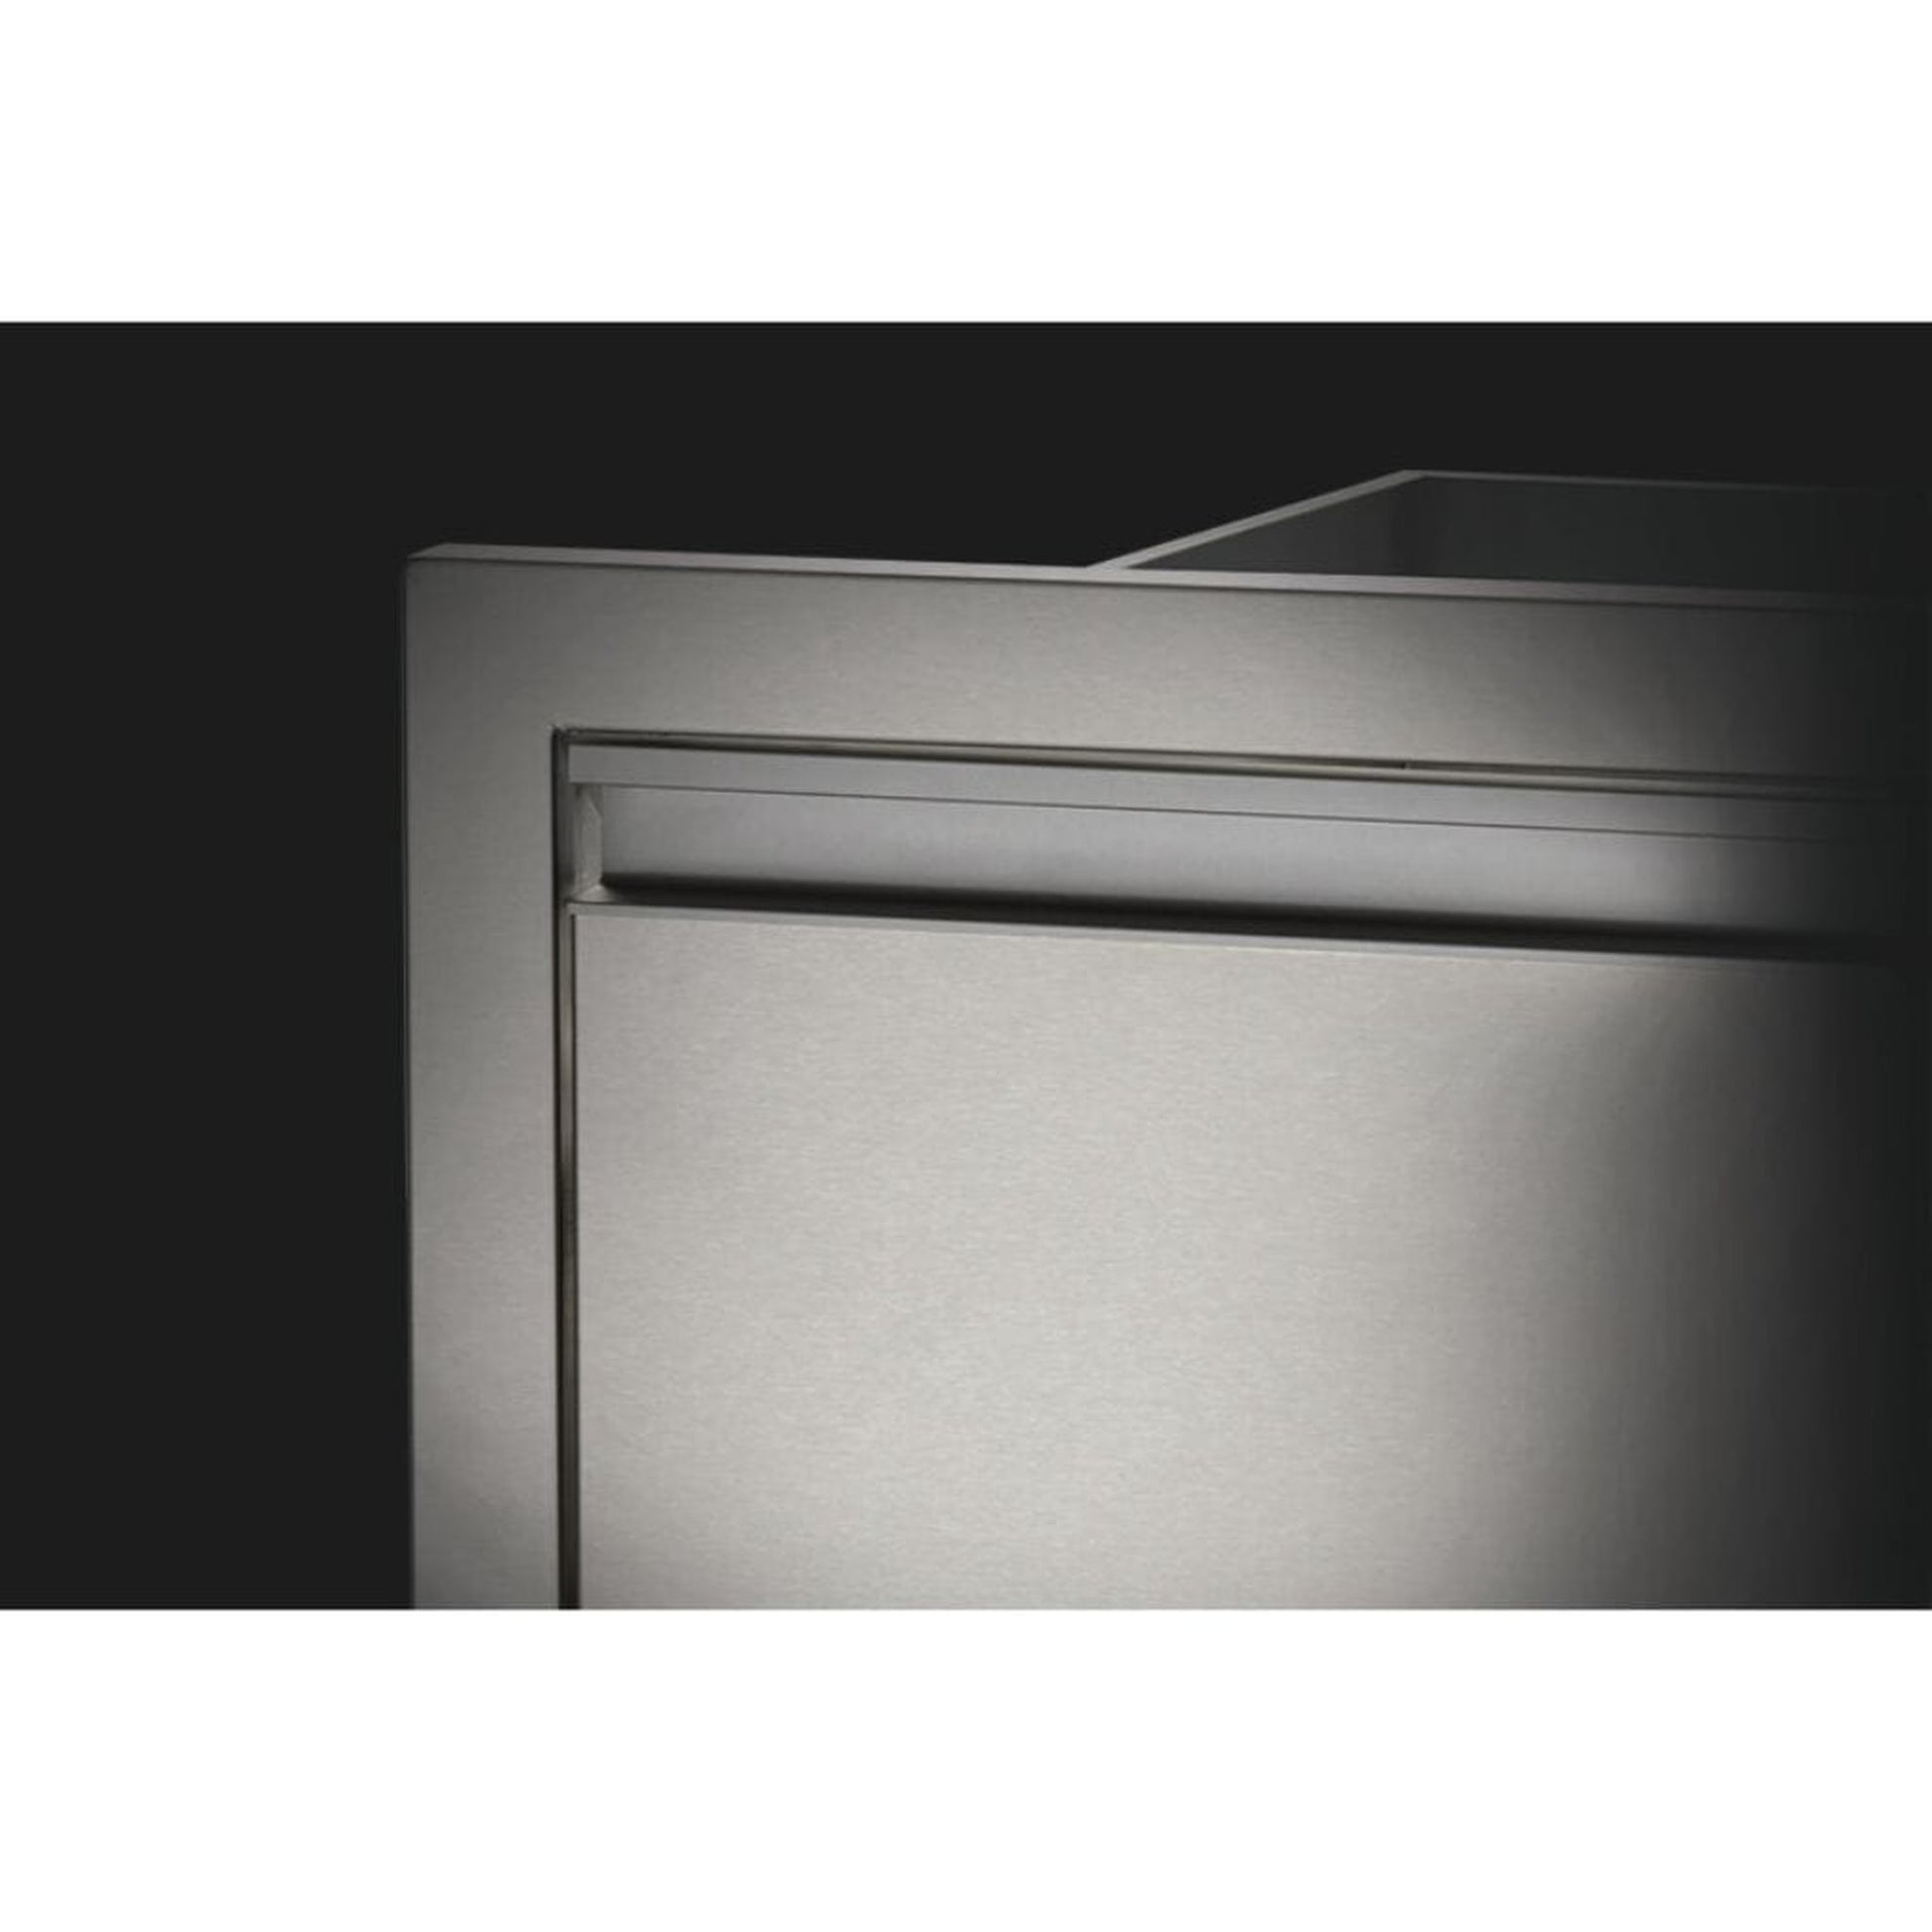 Napoleon 36" X 24" Stainless Steel Single Door and Triple/Double Drawer